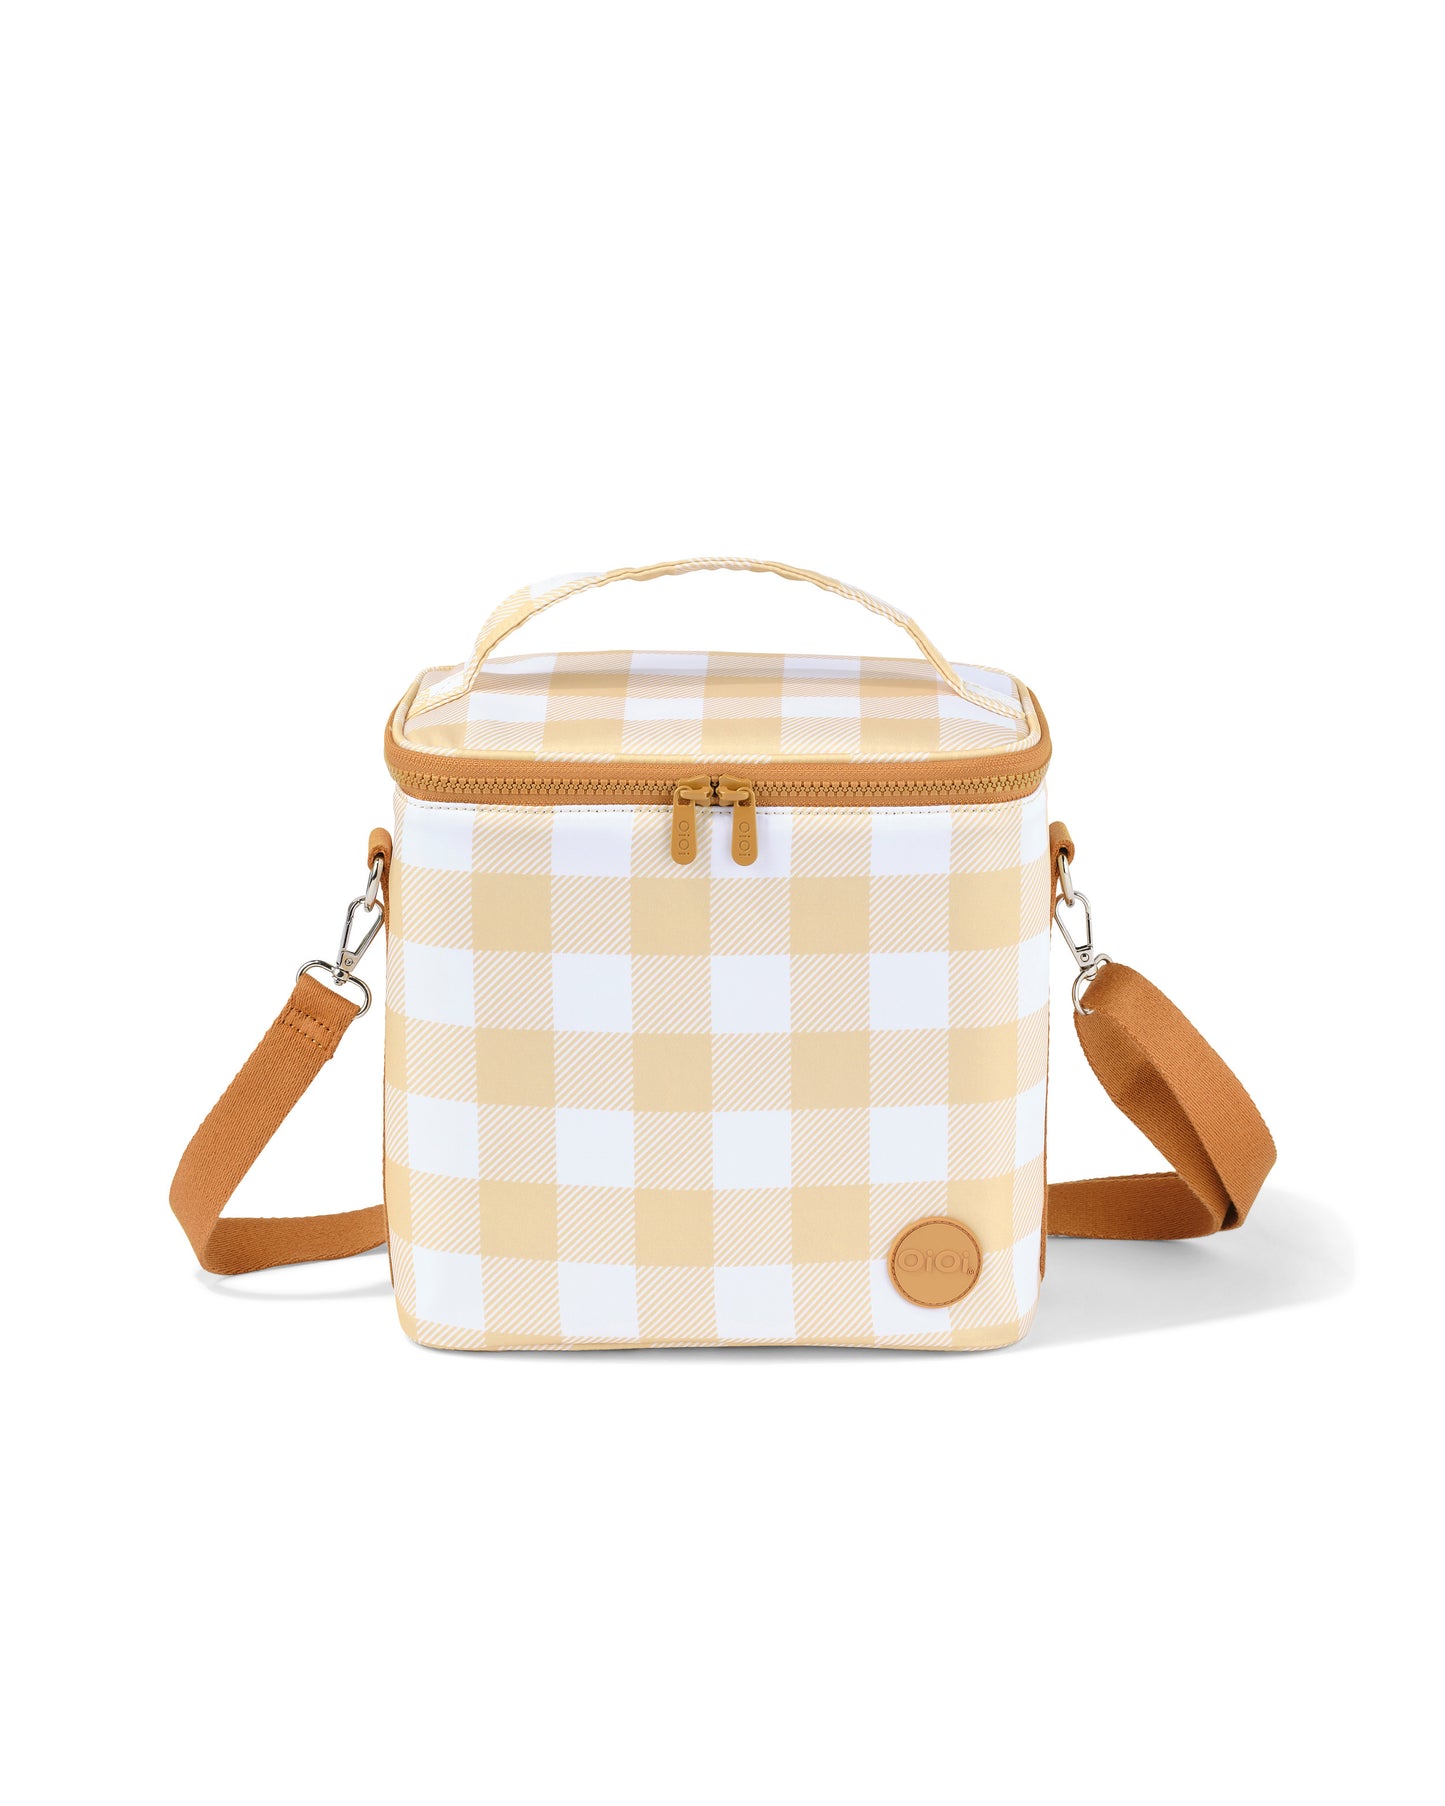 Midi Insulated Lunch Bag- Beige Gingham